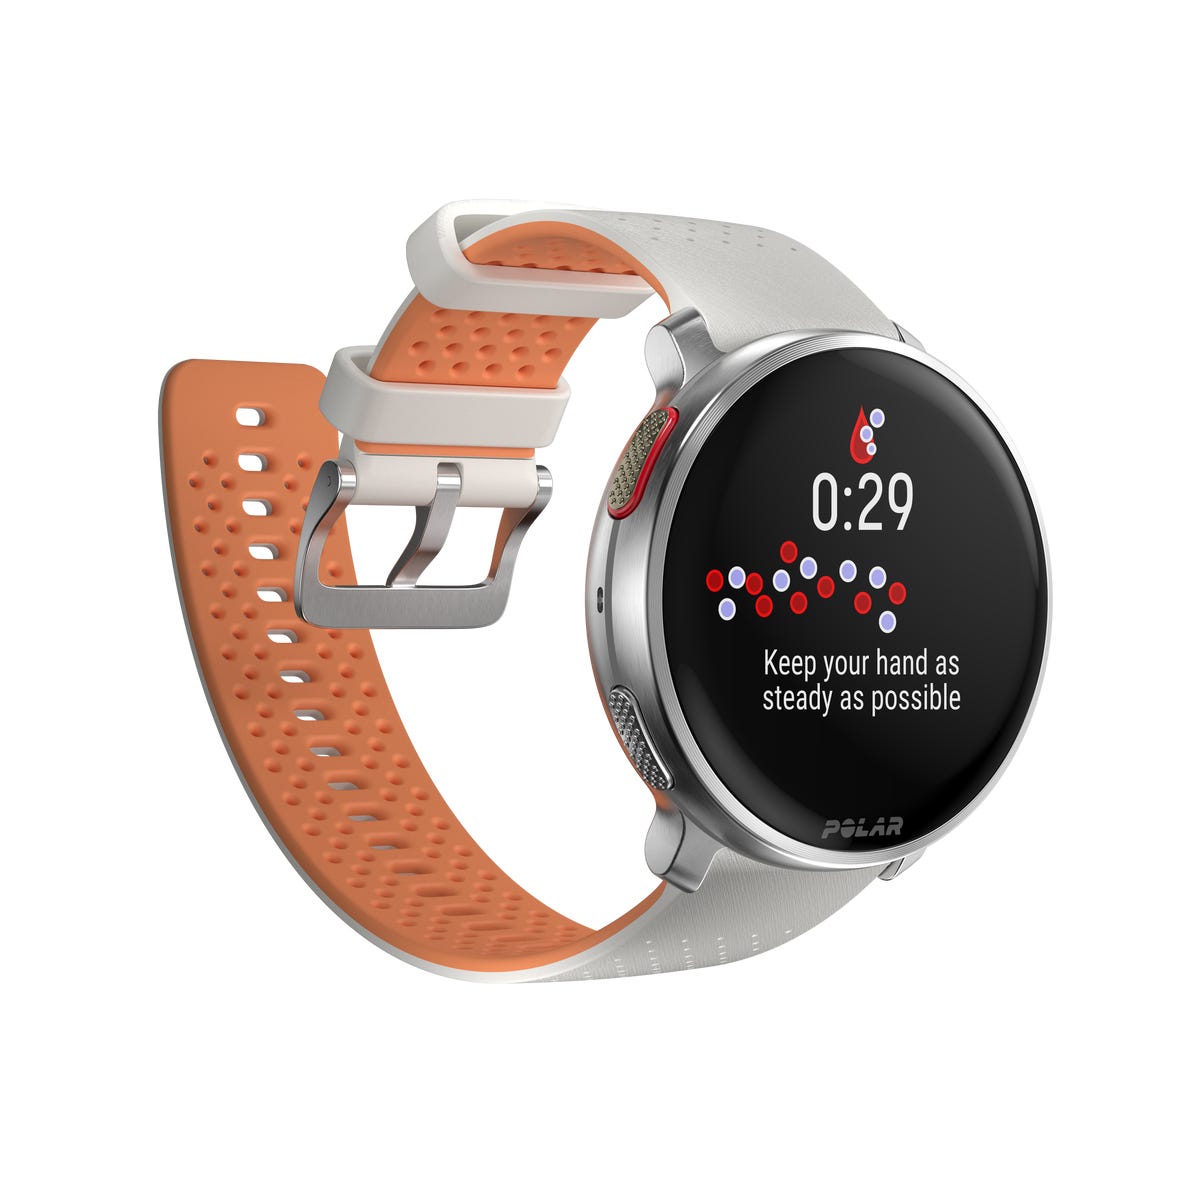 Polar's New Vantage V3 Smartwatch Adds Health Features for Athletes and  Fitness Trackers - CNET